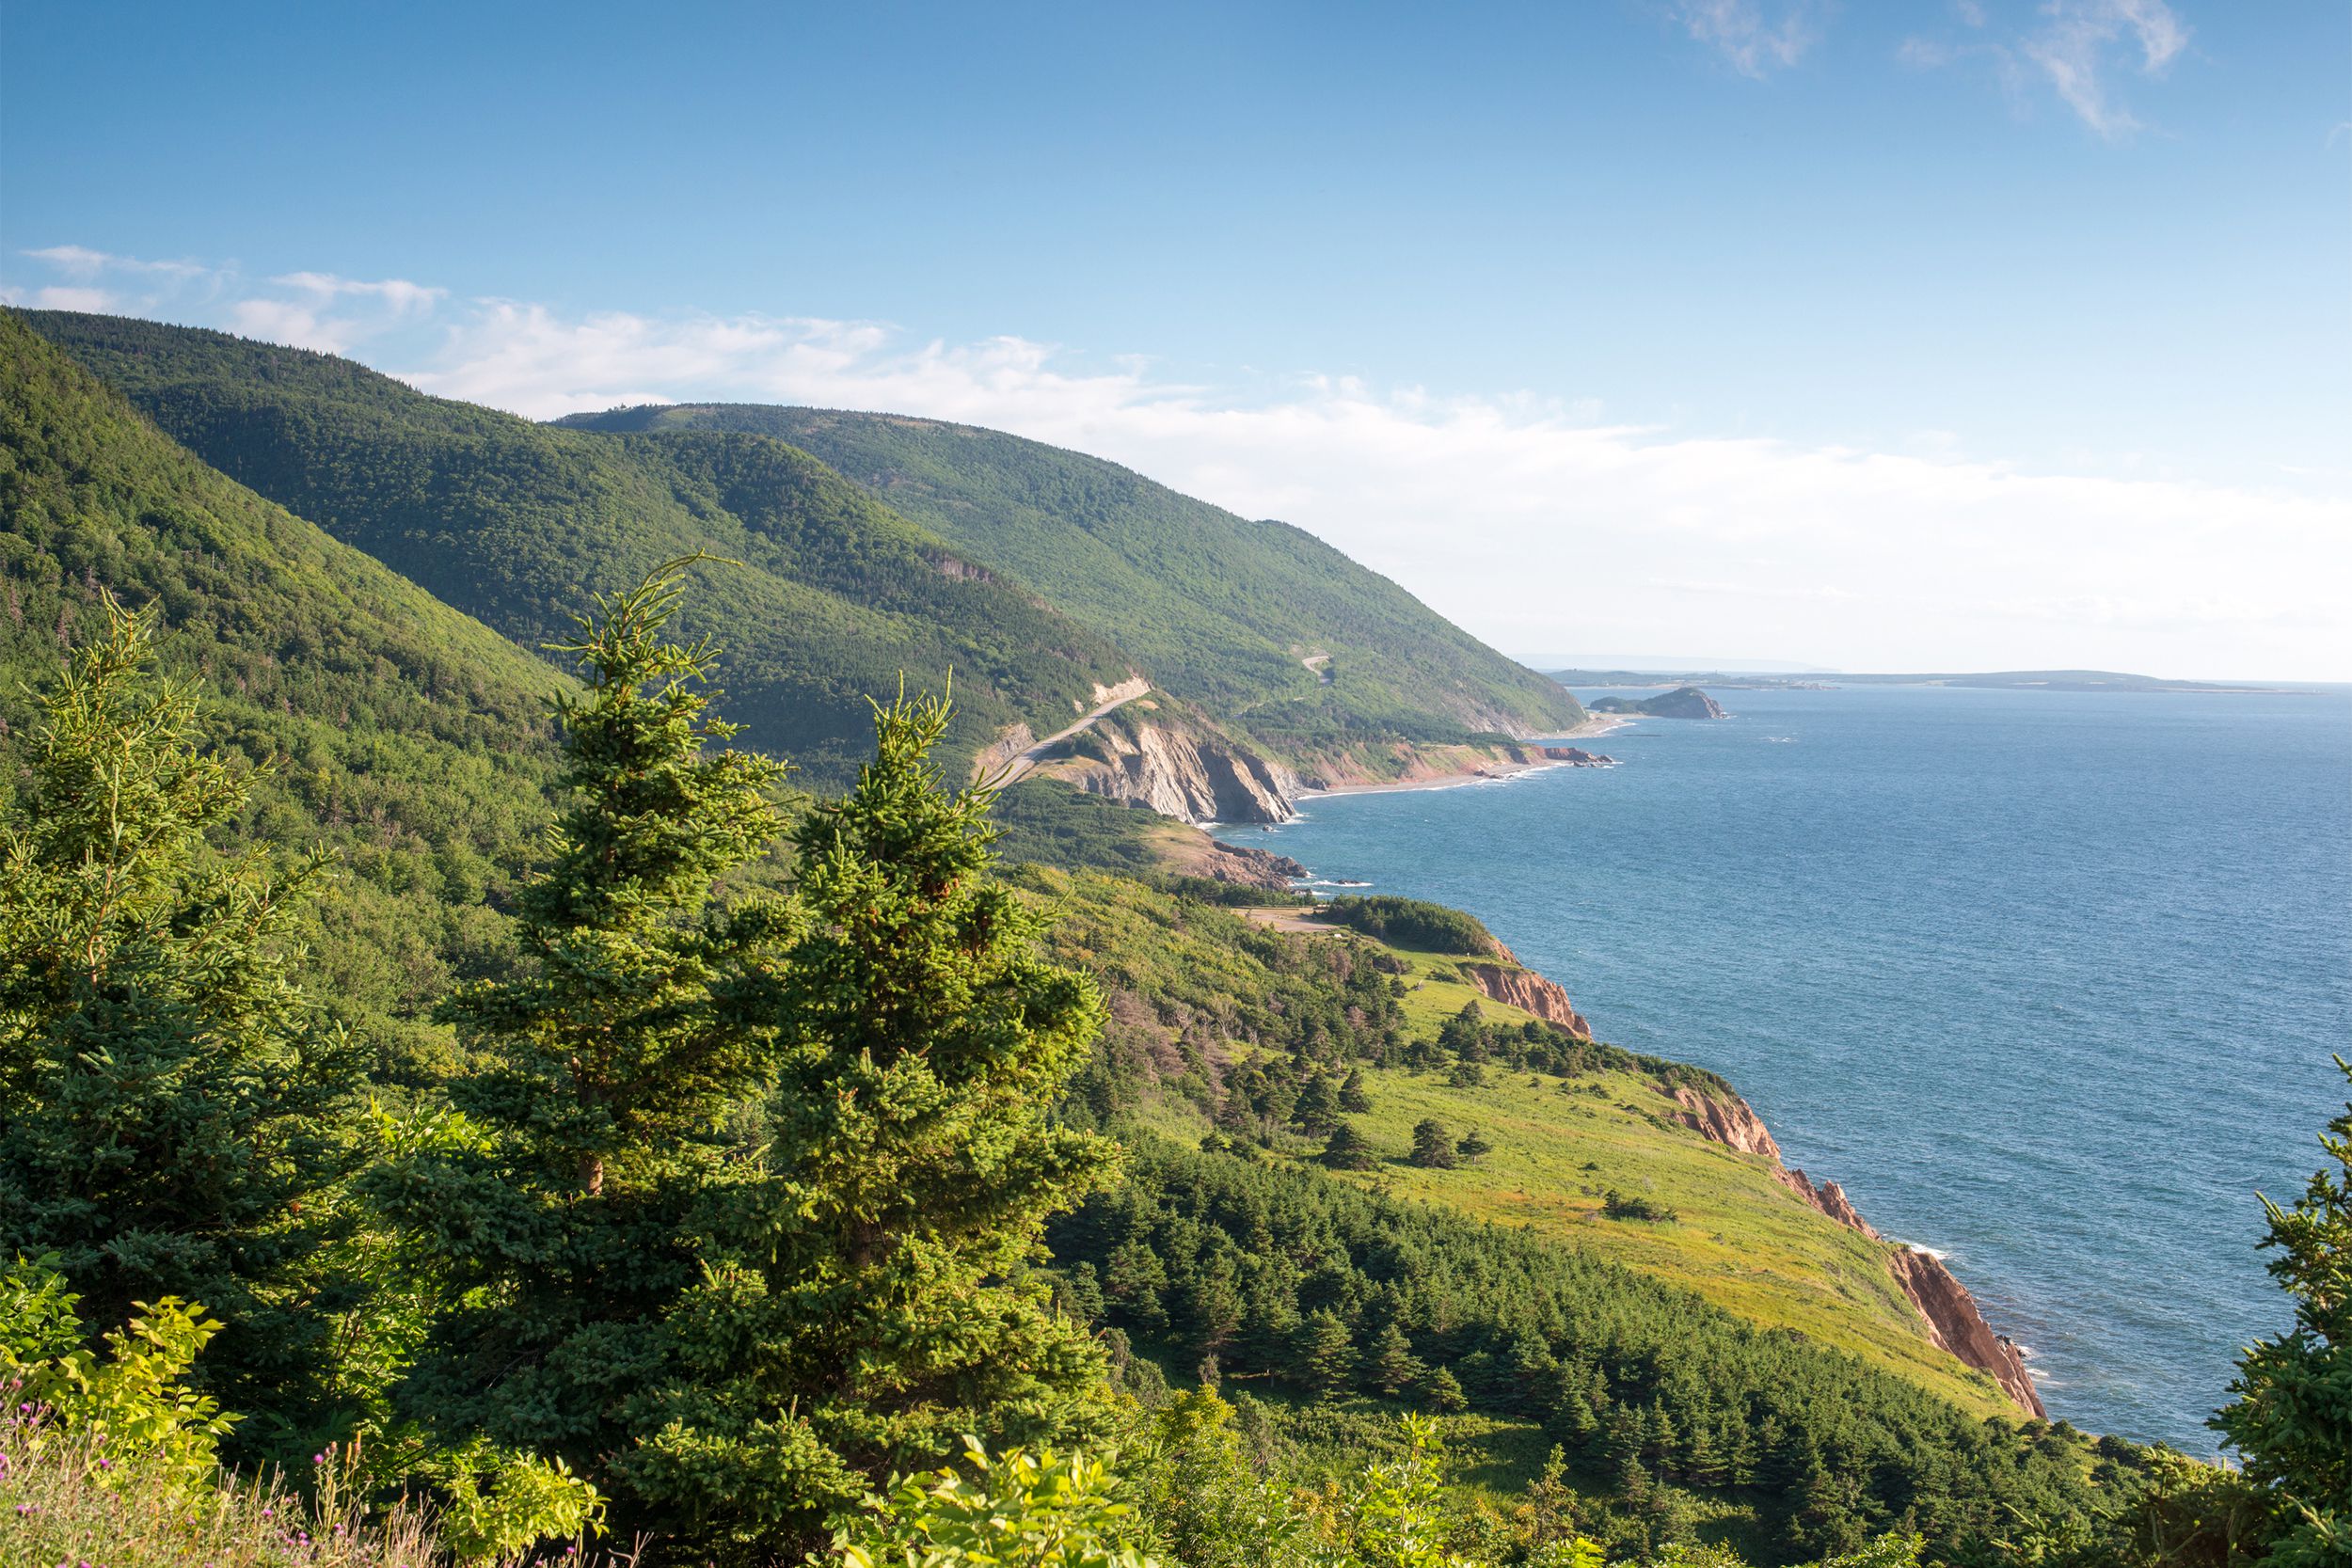 <p>Cape Breton, about 650 miles northeast of Portland, Maine, allows a true getaway for lovers of beaches and nature on a 4,000-square-mile island filled with charming inns.</p>